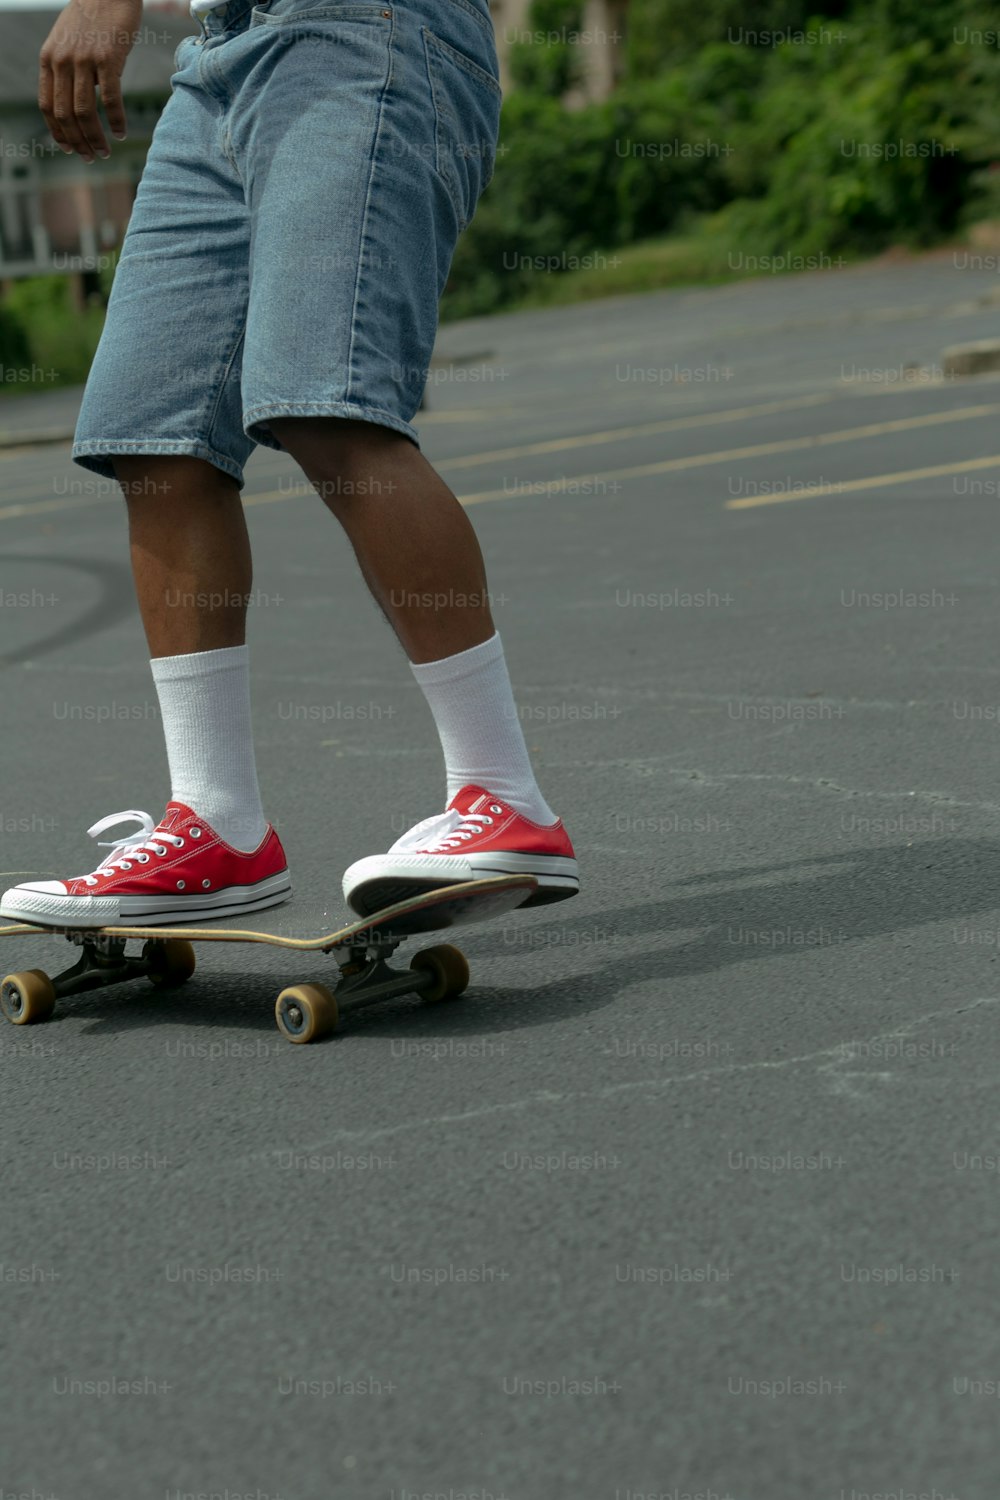 a person riding a skateboard in a parking lot